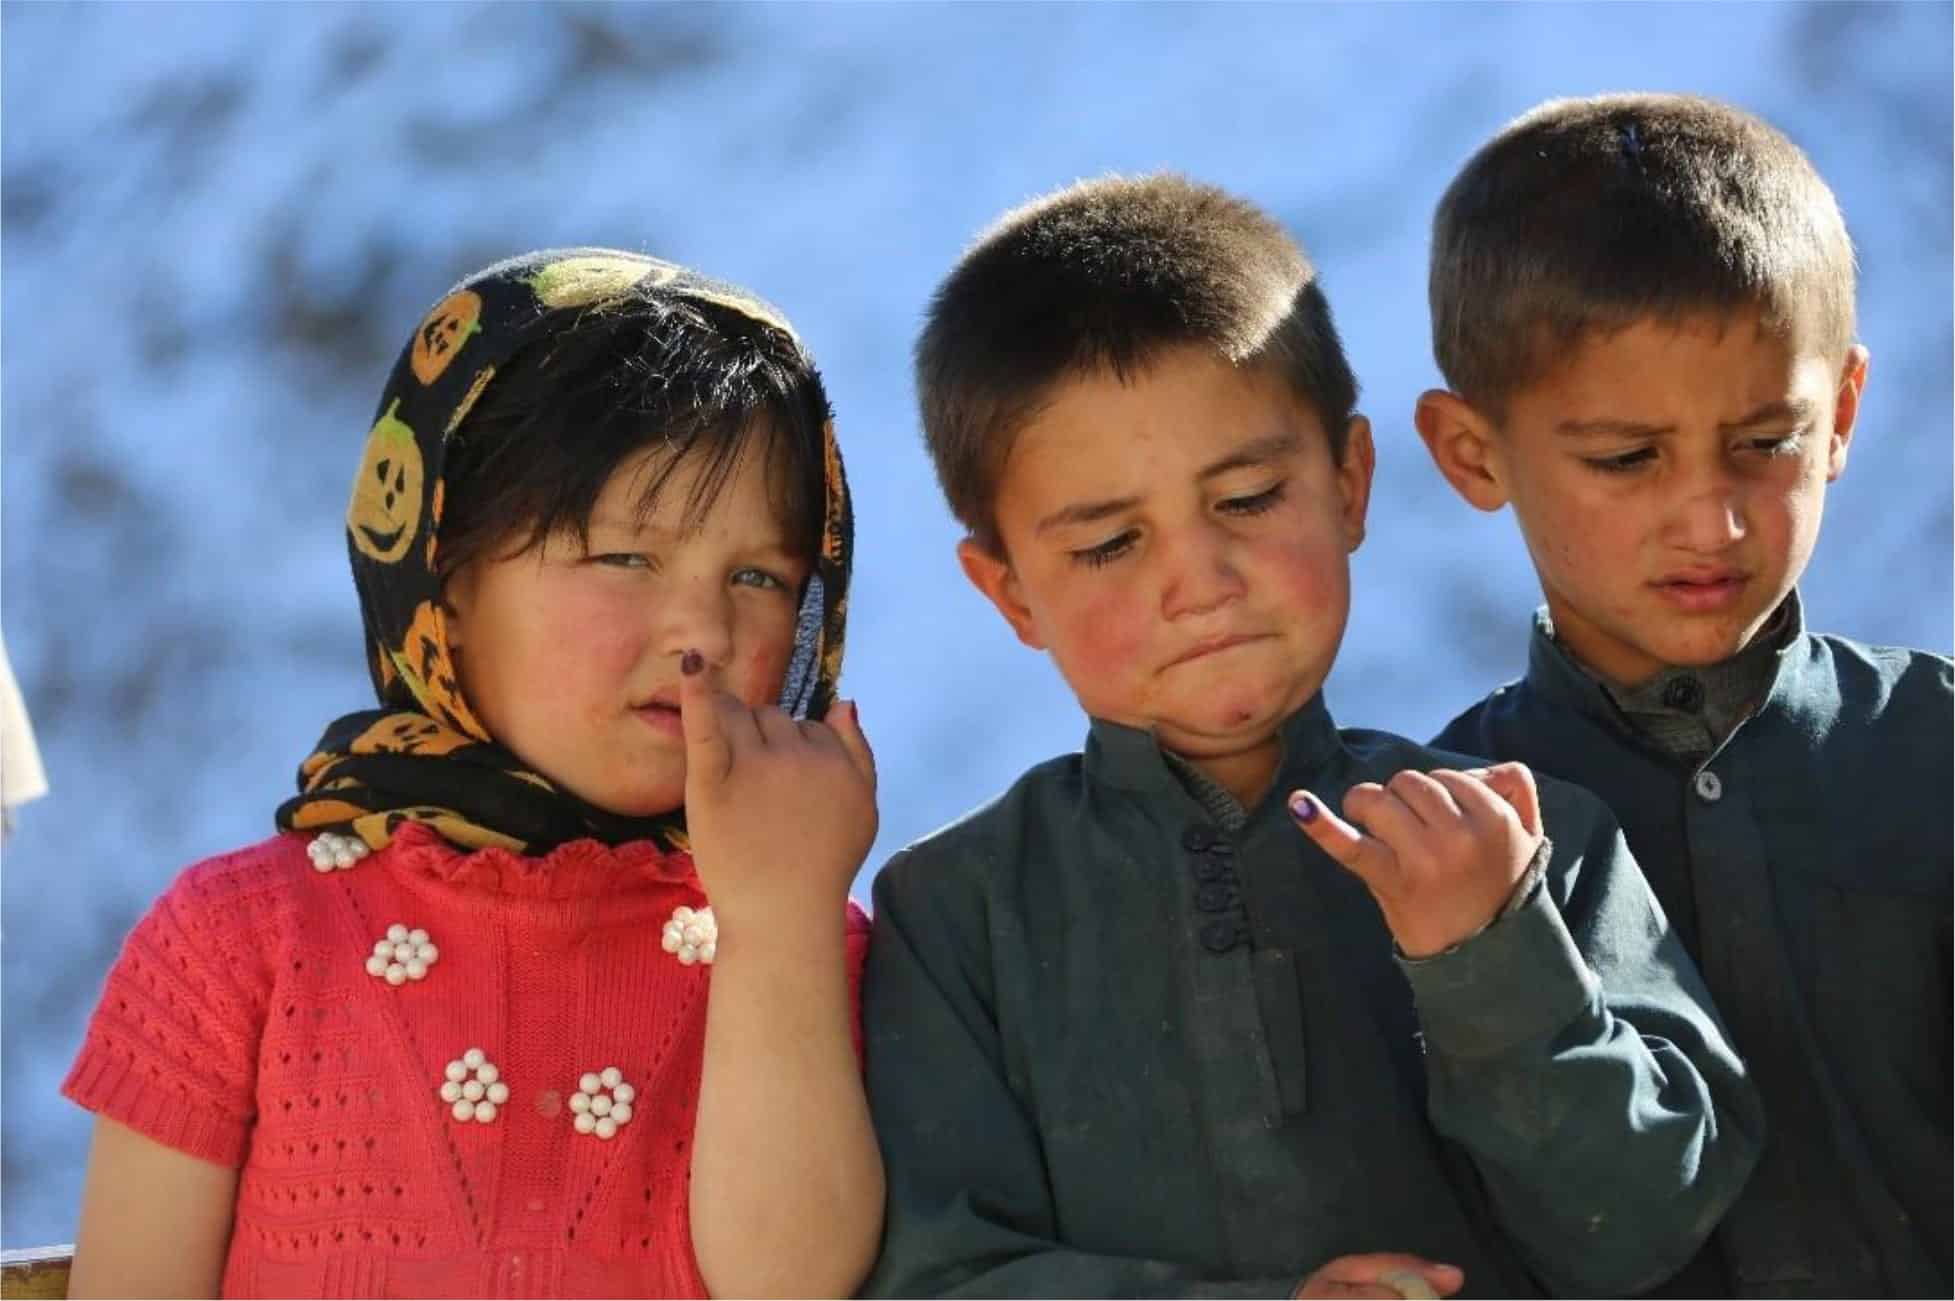 Children show their inked fingers after being vaccinated against polio in Afghanistan